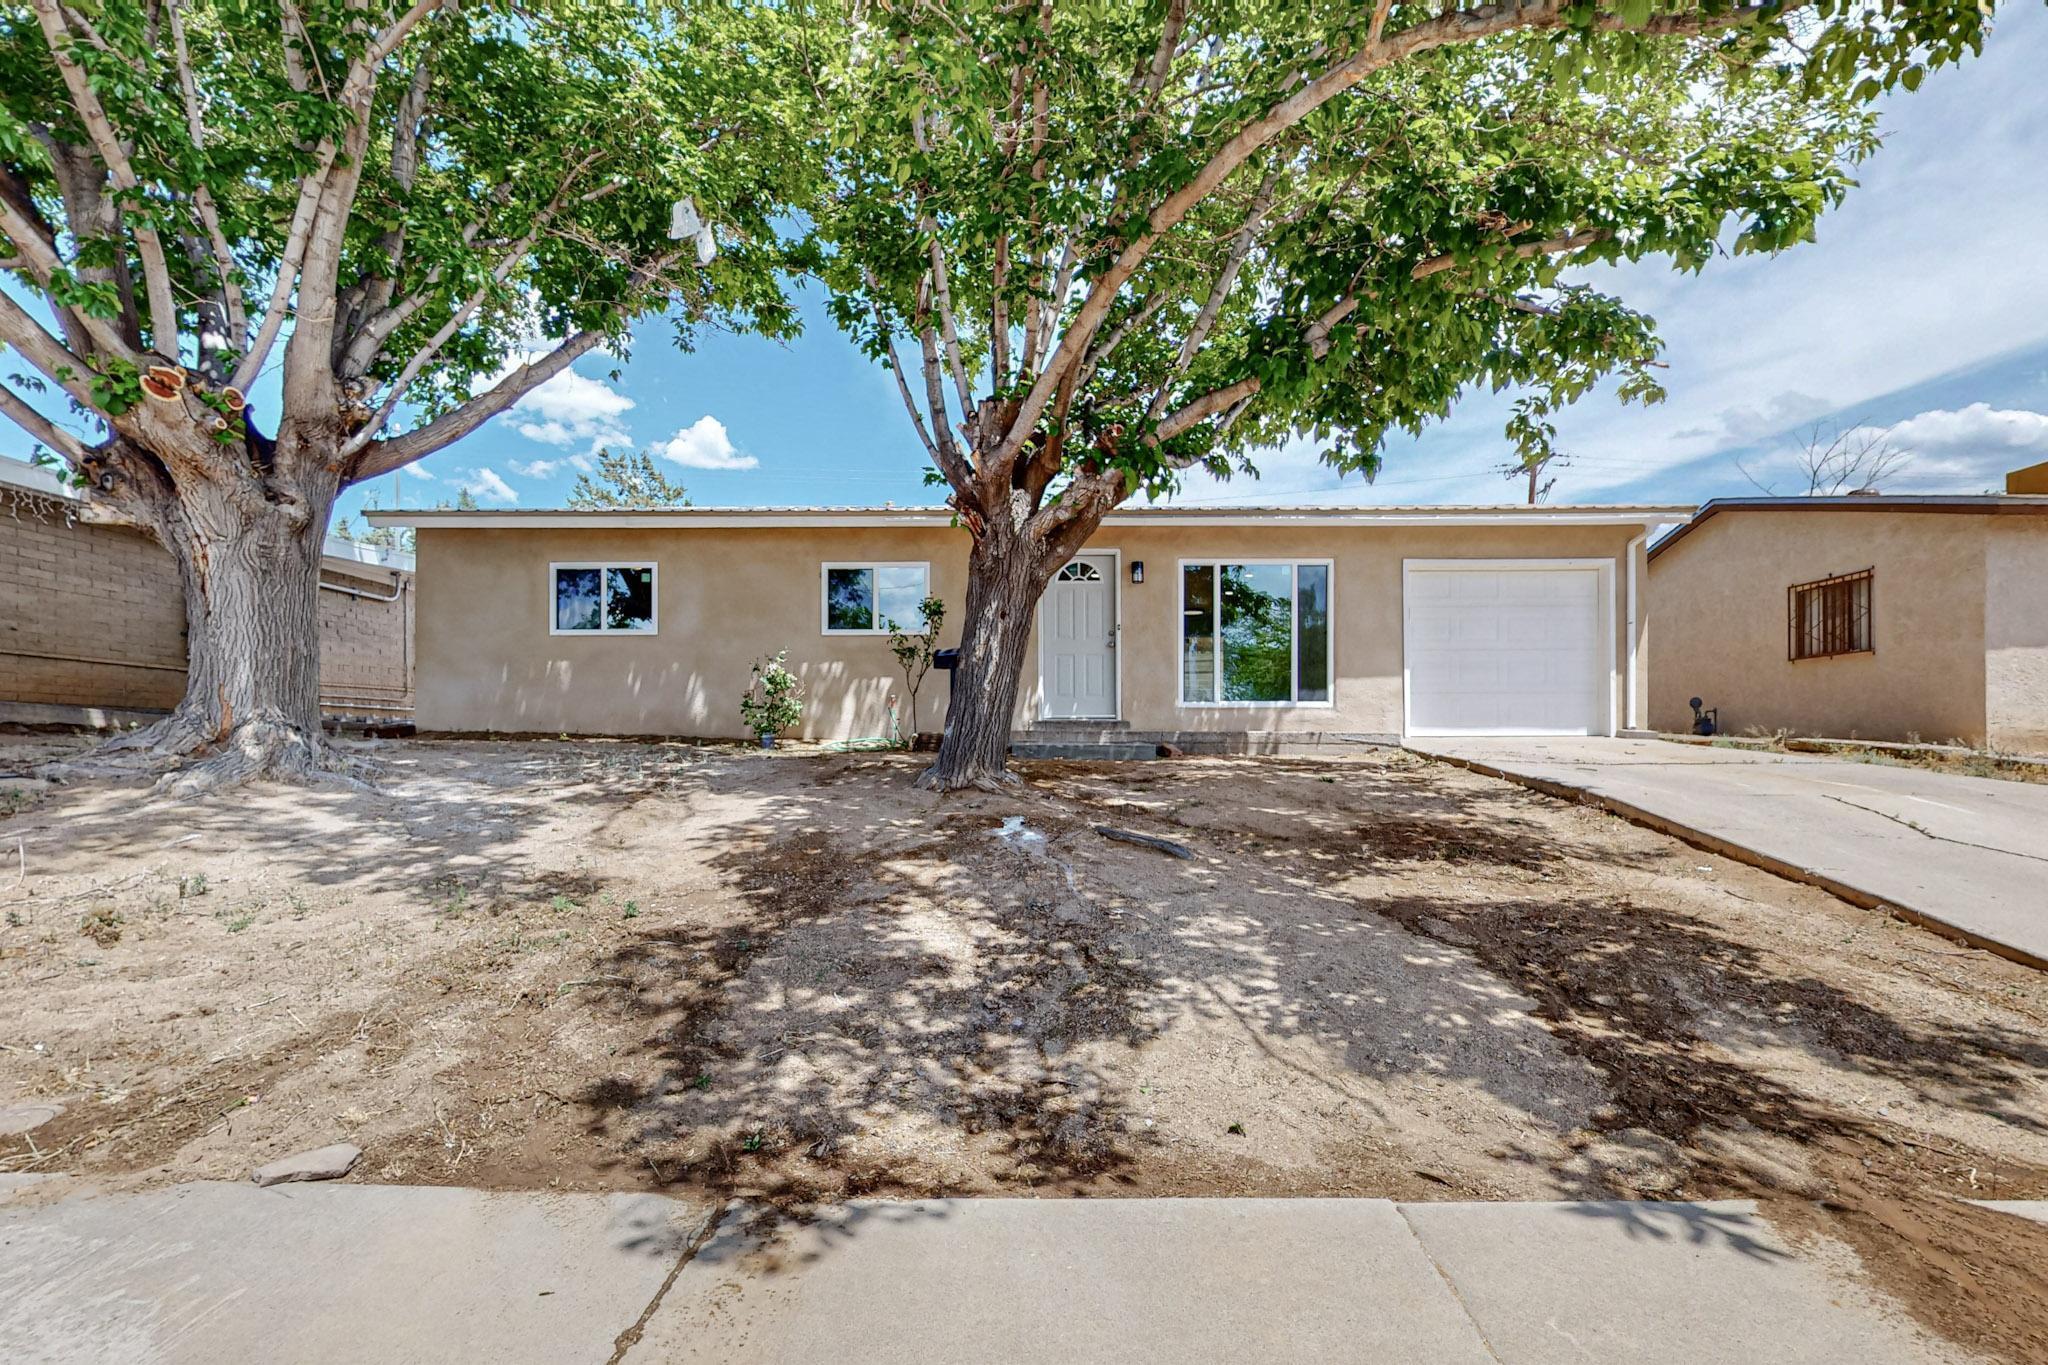 LOCATION. Close to base, freeway and shopping! New metal room, HVAC, refrigerated air, stucco, windows, appliances, LV flooring, cabinets, bathroom. New LG appliances that convey with the home! Won't last! Must see! Large yard ready for you to landscape.